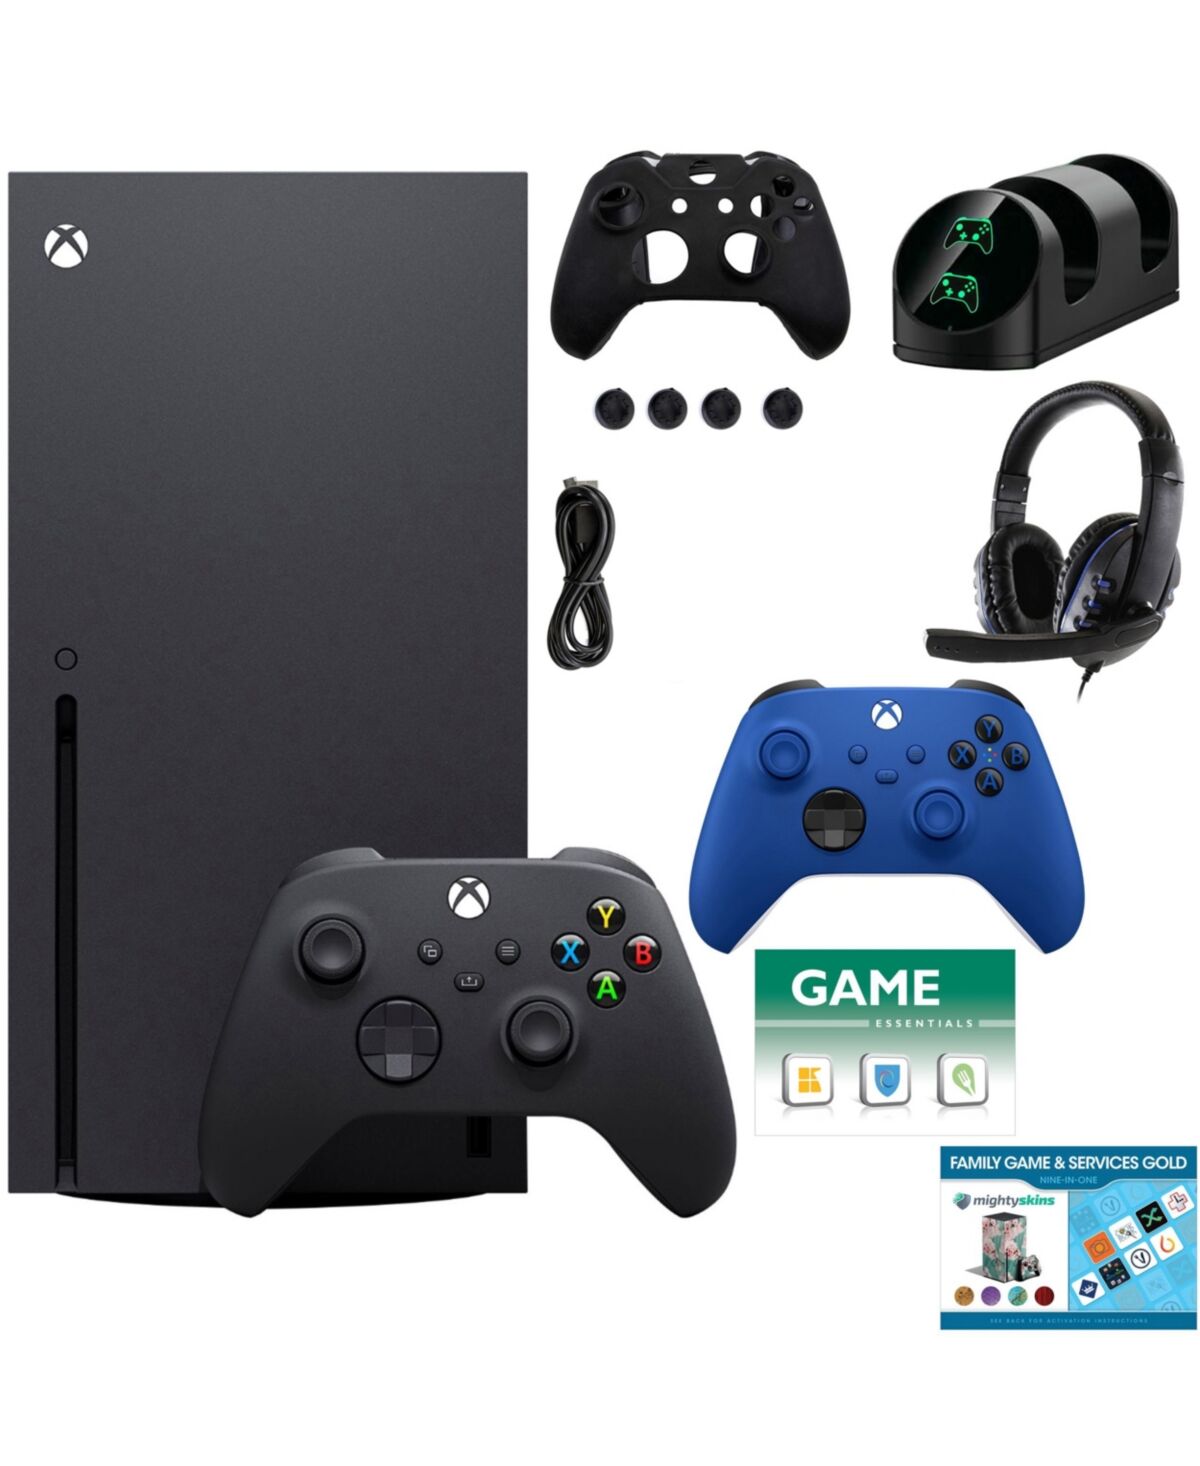 Xbox Series X Console w/ Extra Controller, Accessories & 2 Vouchers - Black